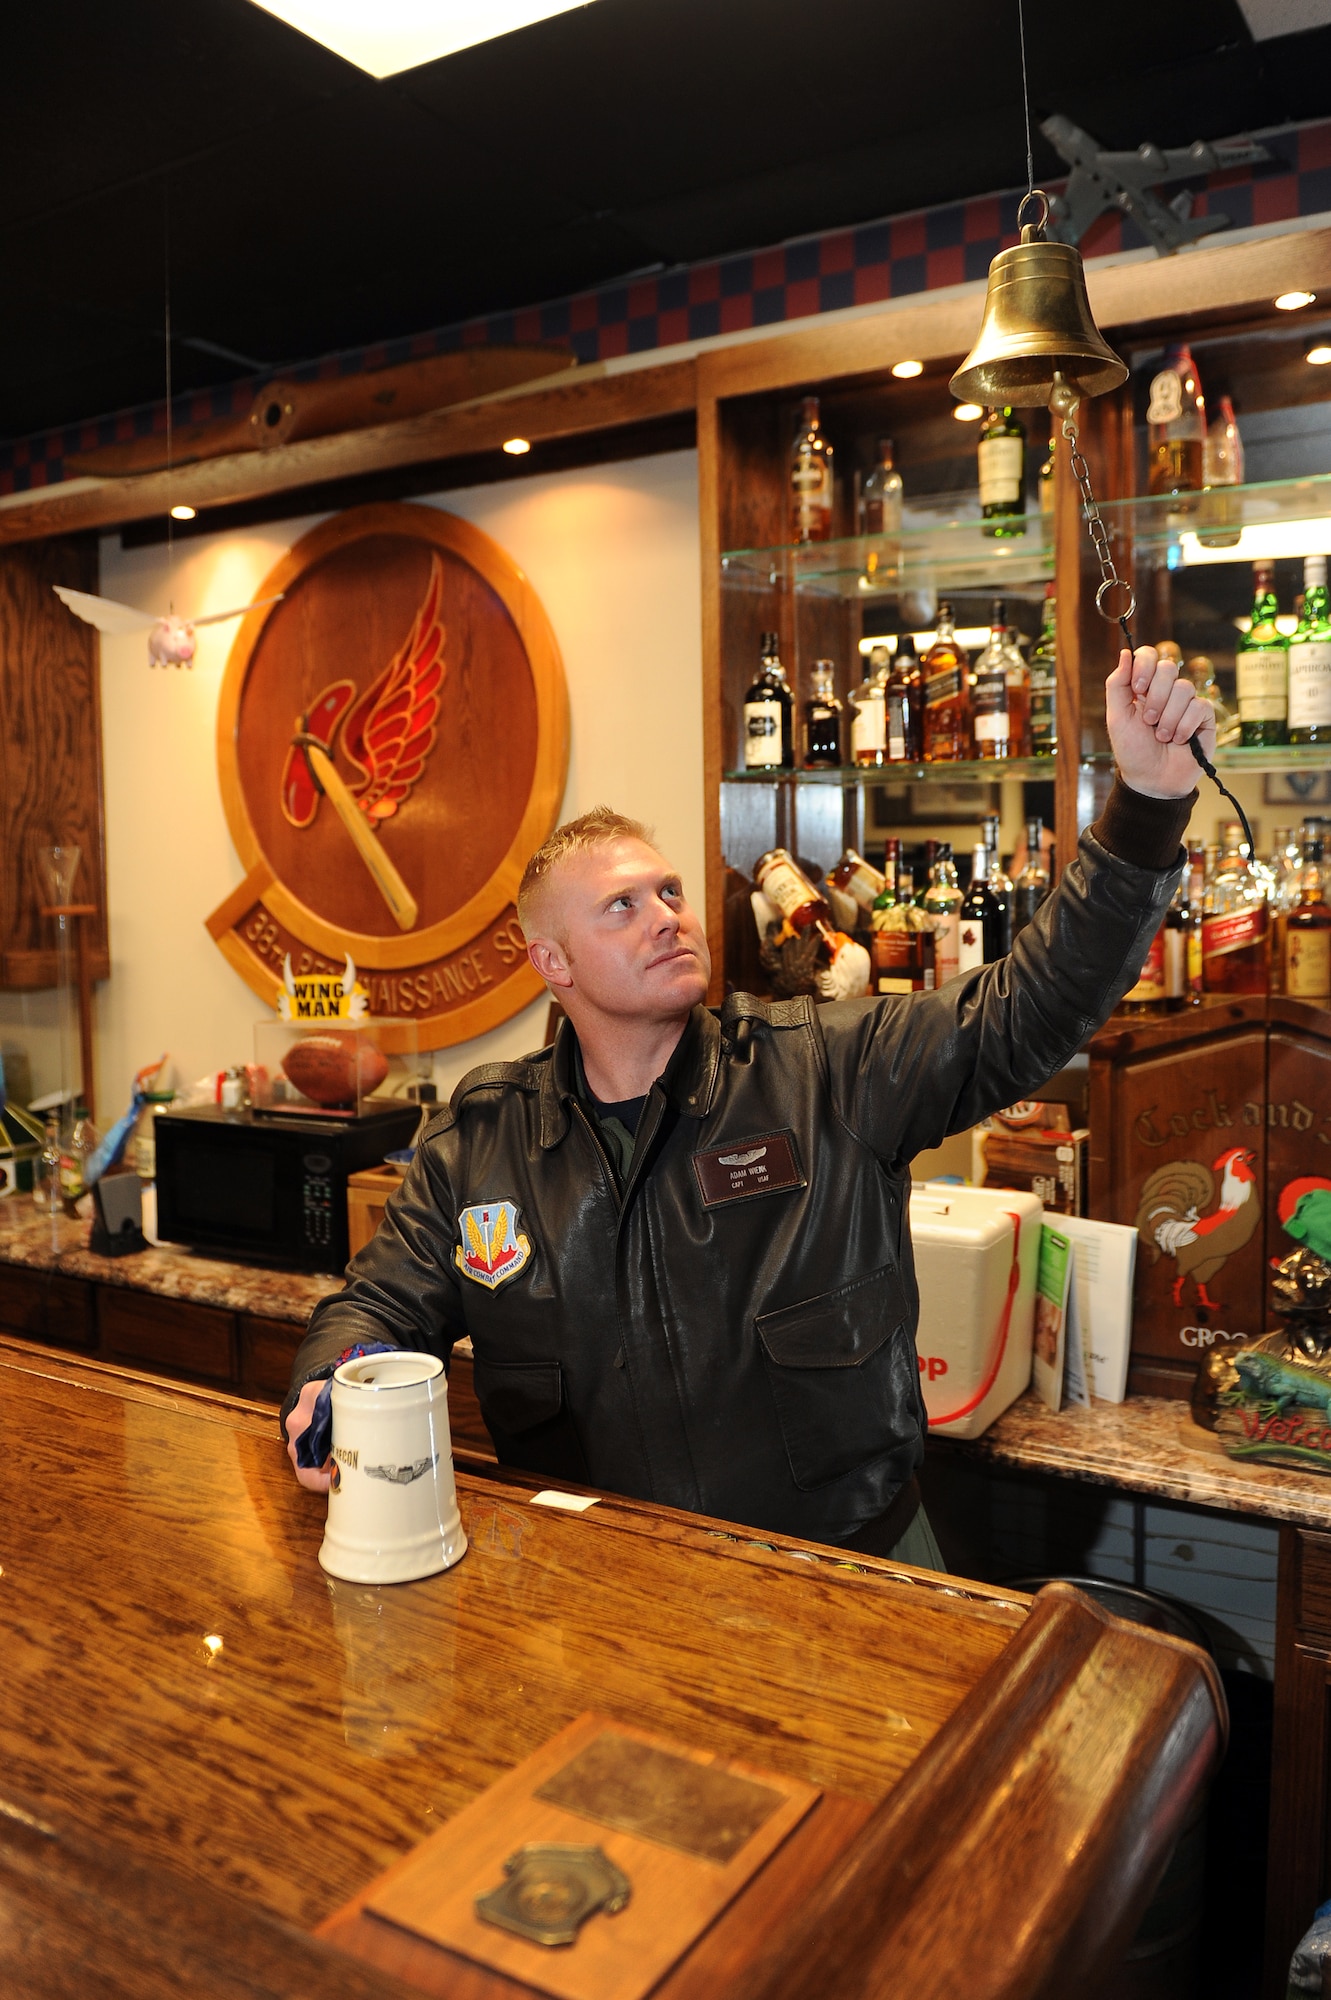 U.S. Air Force Capt. Adam Weink, 38th Reconnaissance Squadron’s heritage room mayor, rings the bell located above the bar following the weekly roll call on Jan. 9, Offutt Air Force Base, Neb.  The bell is rung for a variety of reasons and is fixture in many heritage rooms.  (U.S. Air Force photo by Josh Plueger/Released)